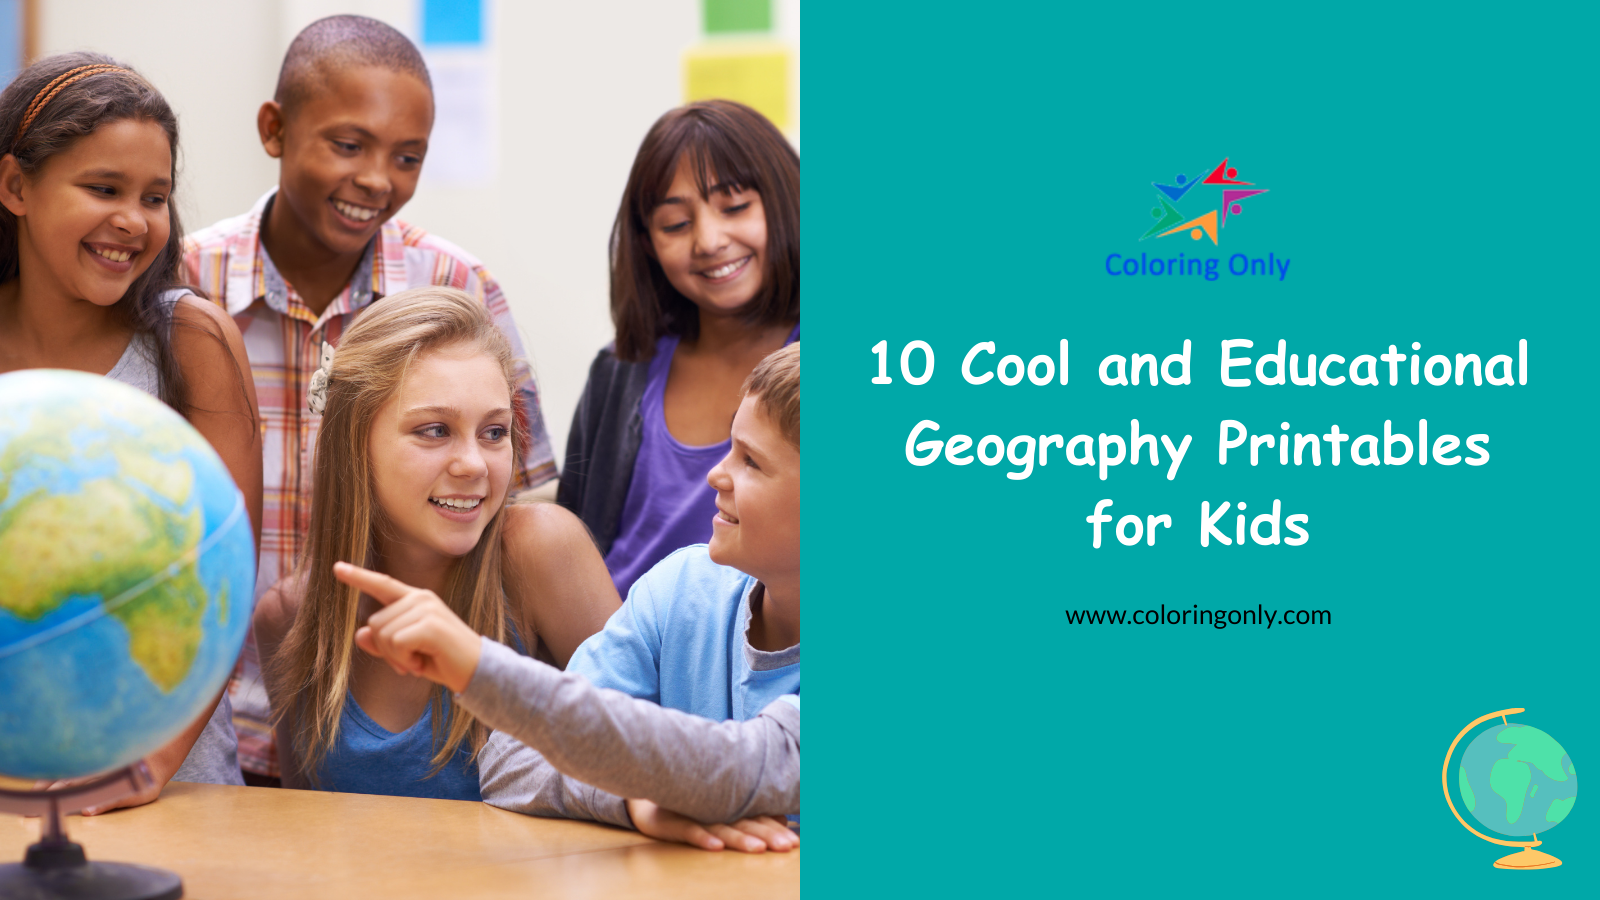 10 Cool and Educational Geography Printables for Kids